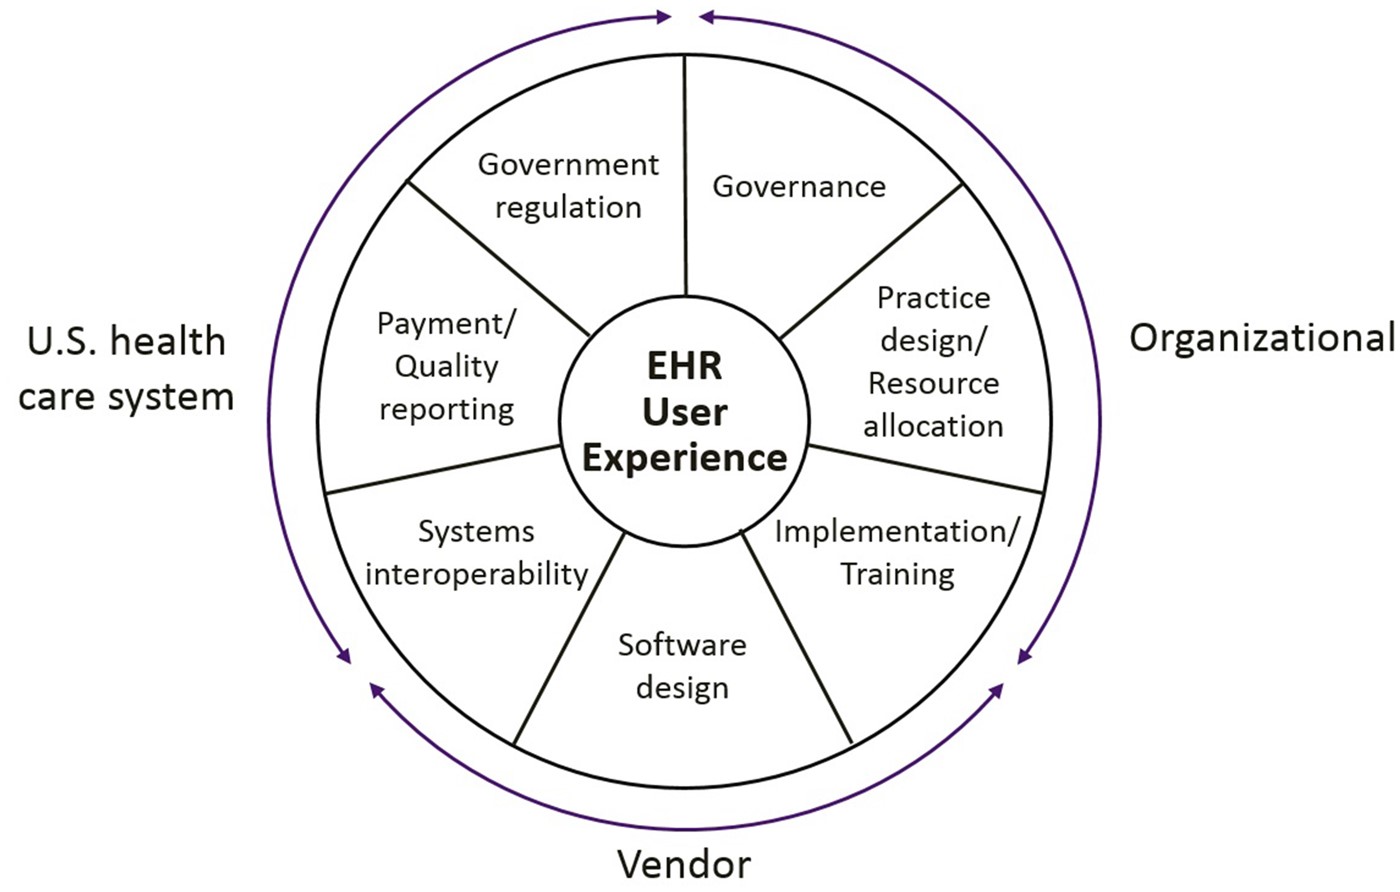 Electronic health record (EHR) user experience influences. Source: Authors’ analysis of environmental factors contributing to EHR end-user experience as documented in current literature.